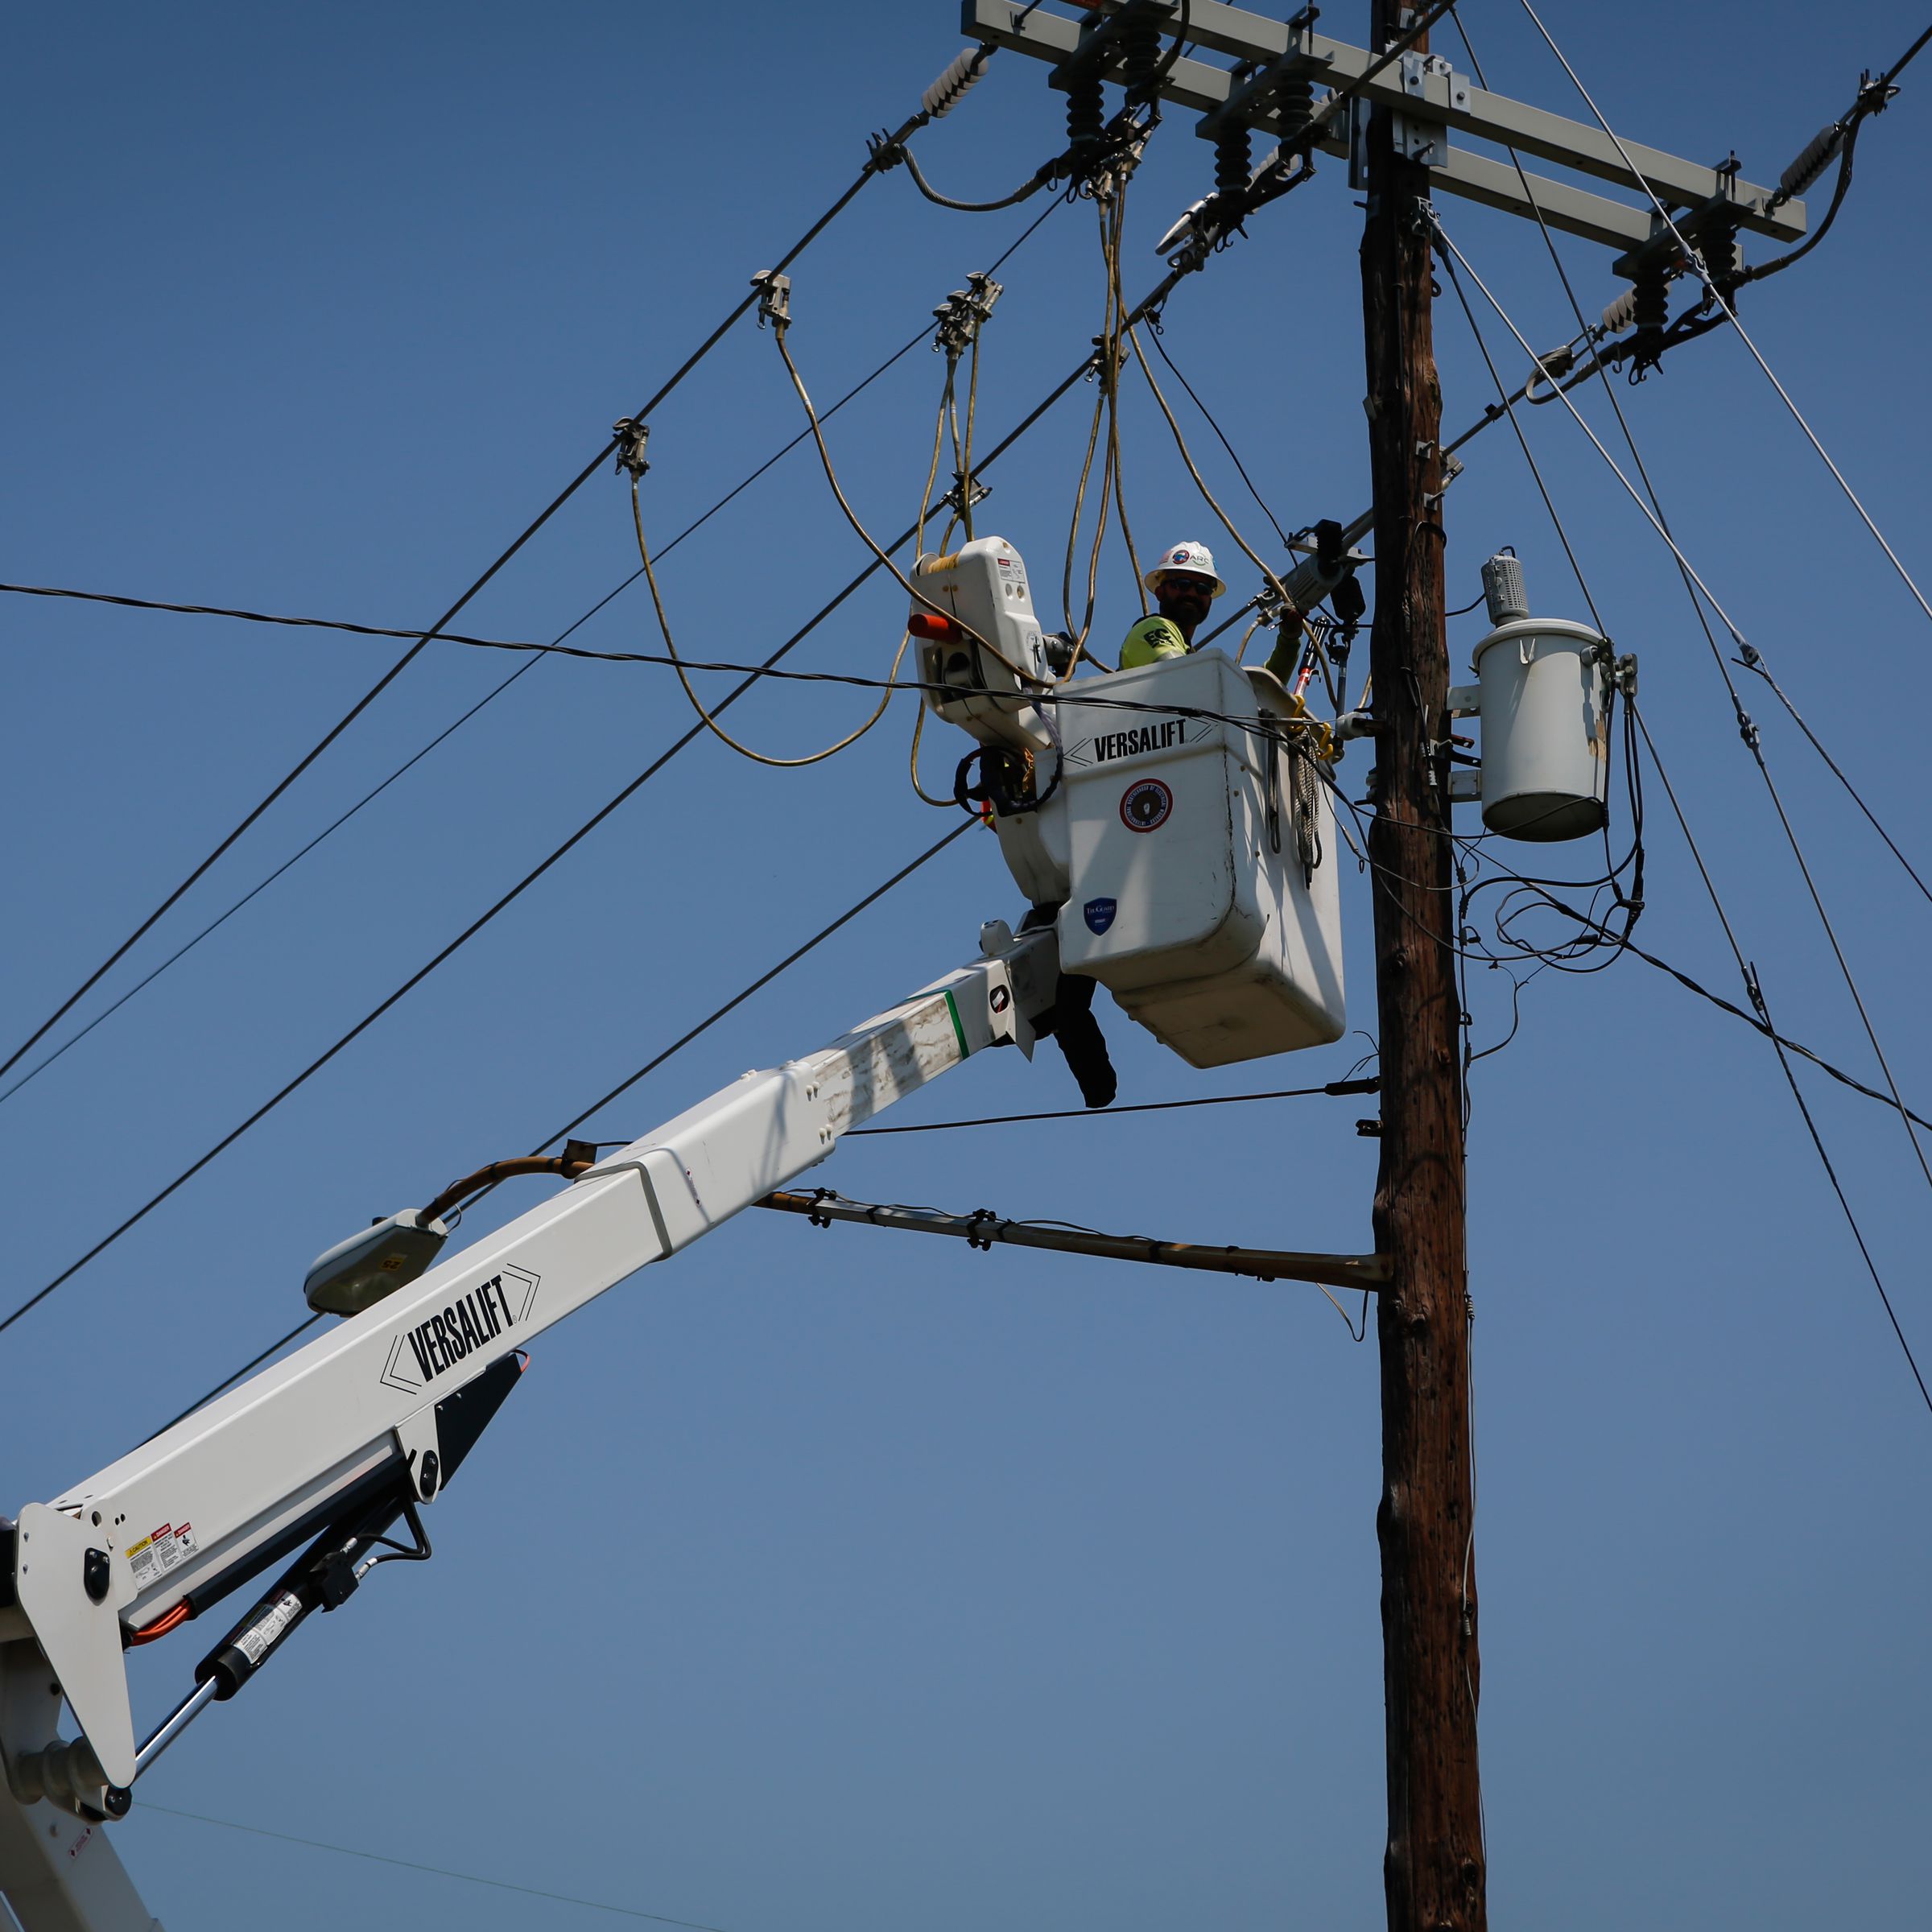 A worker repairs a utility pole during a power outage after Hurricane Ida in New Orleans, Louisiana, U.S., on Thursday, September 2nd, 2021.